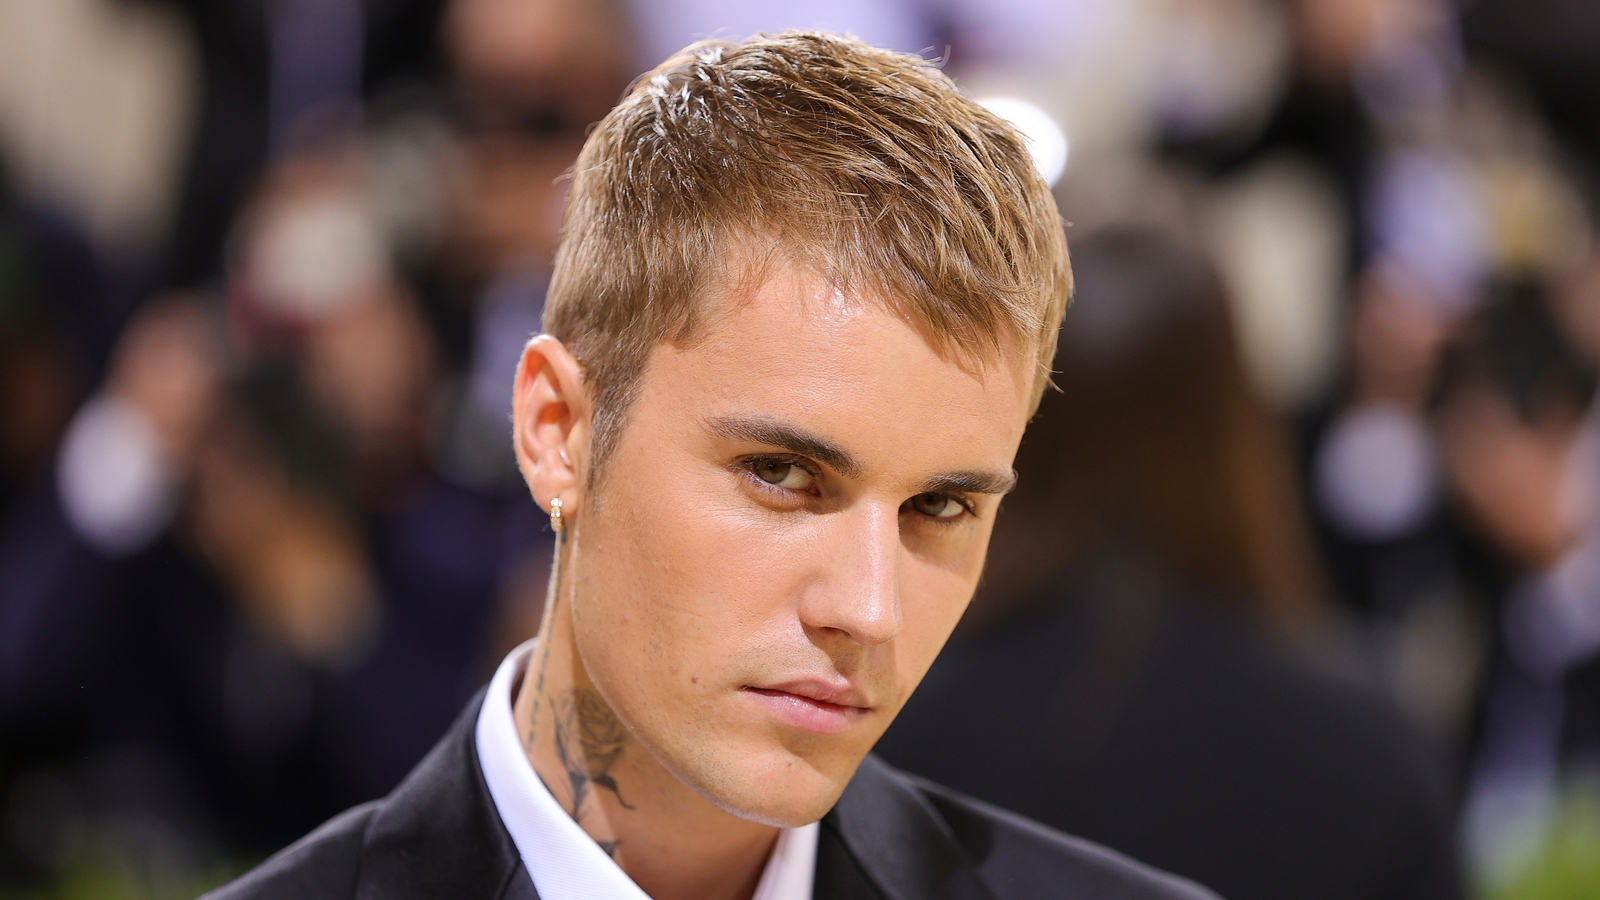 Justin Bieber sells rights to his music in deal worth $200m